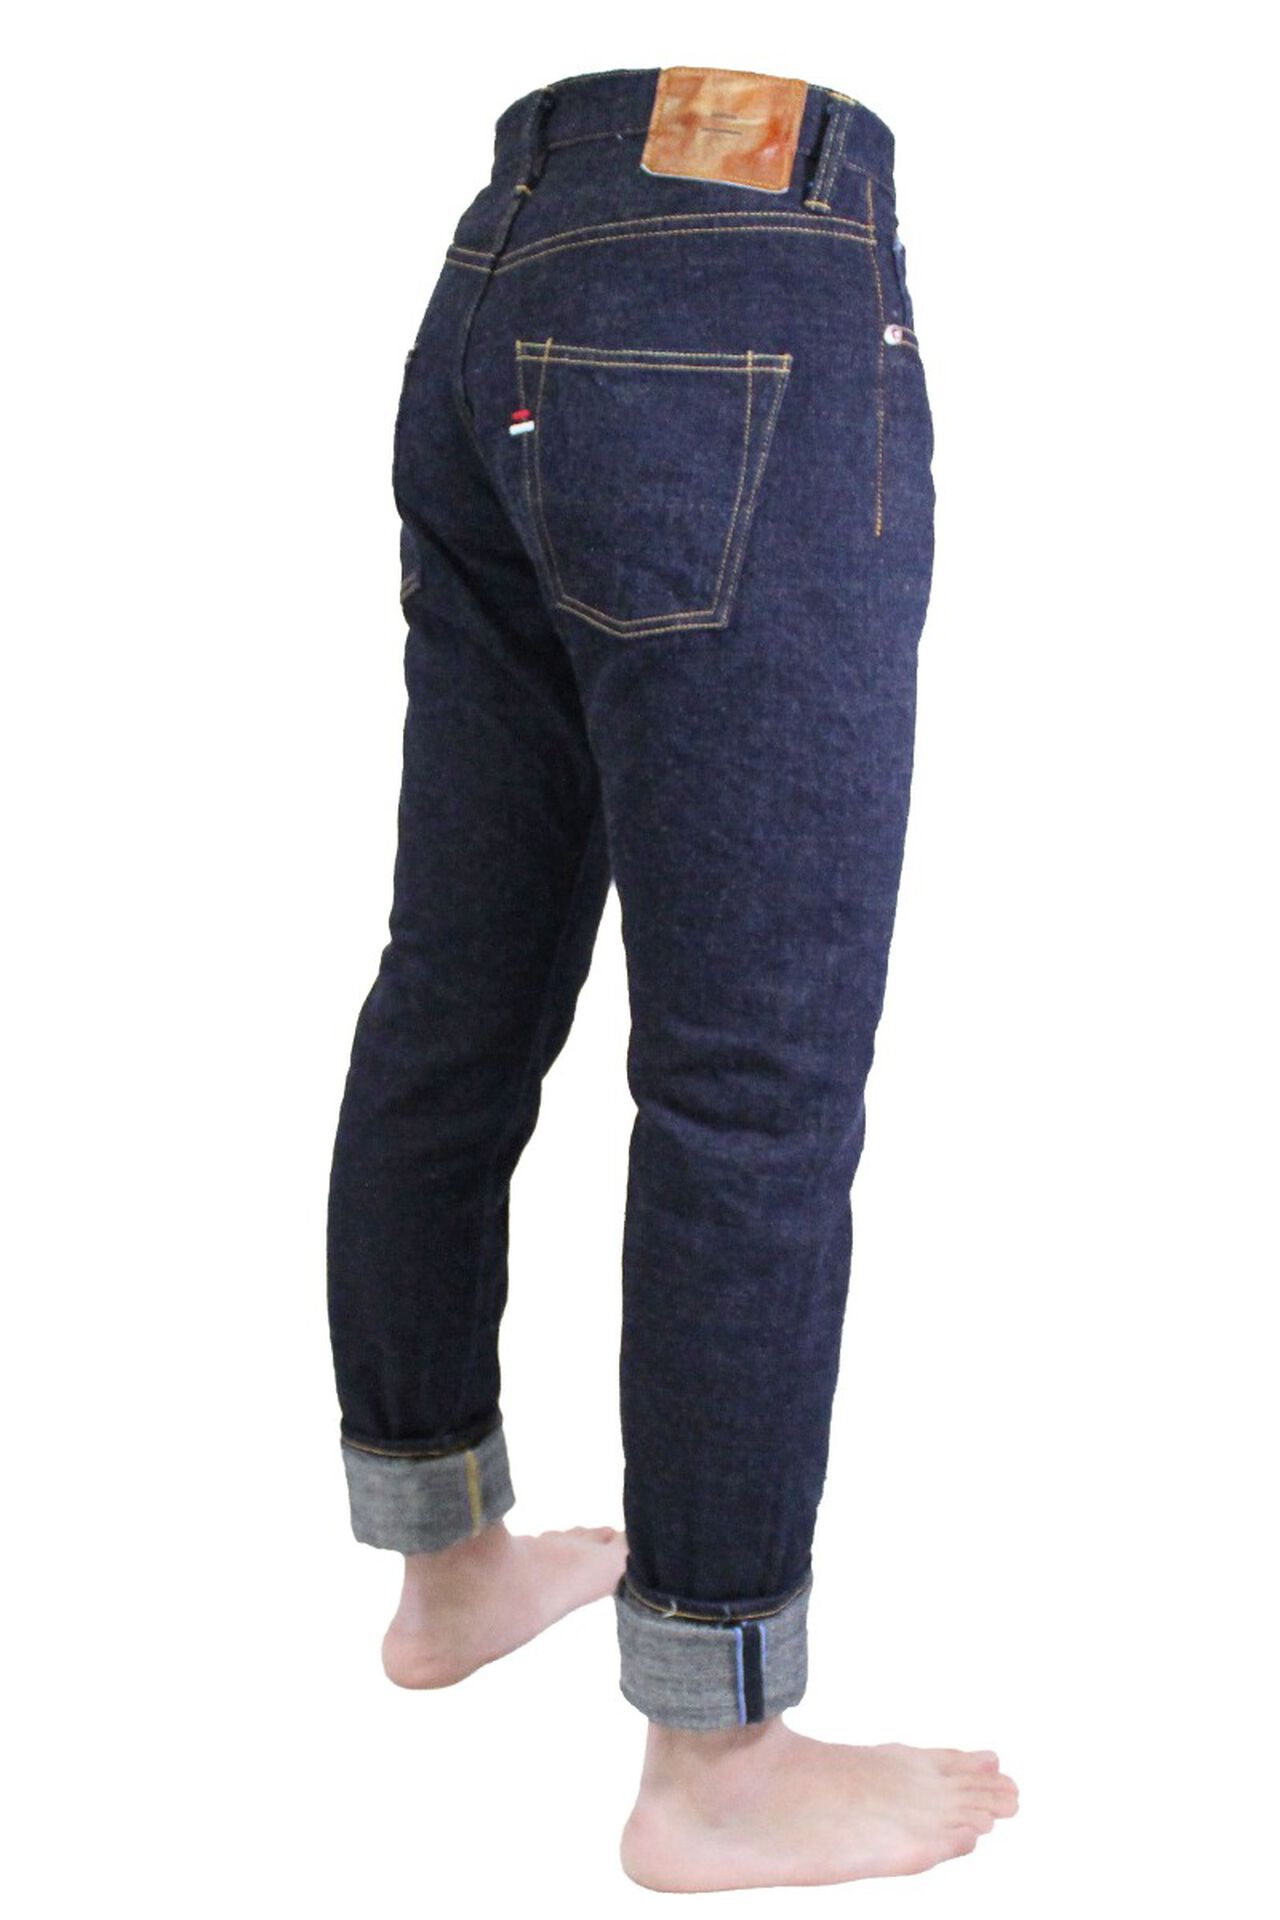 THT 12.5oz "天 (Ten)" High Tapered Jeans,, large image number 2